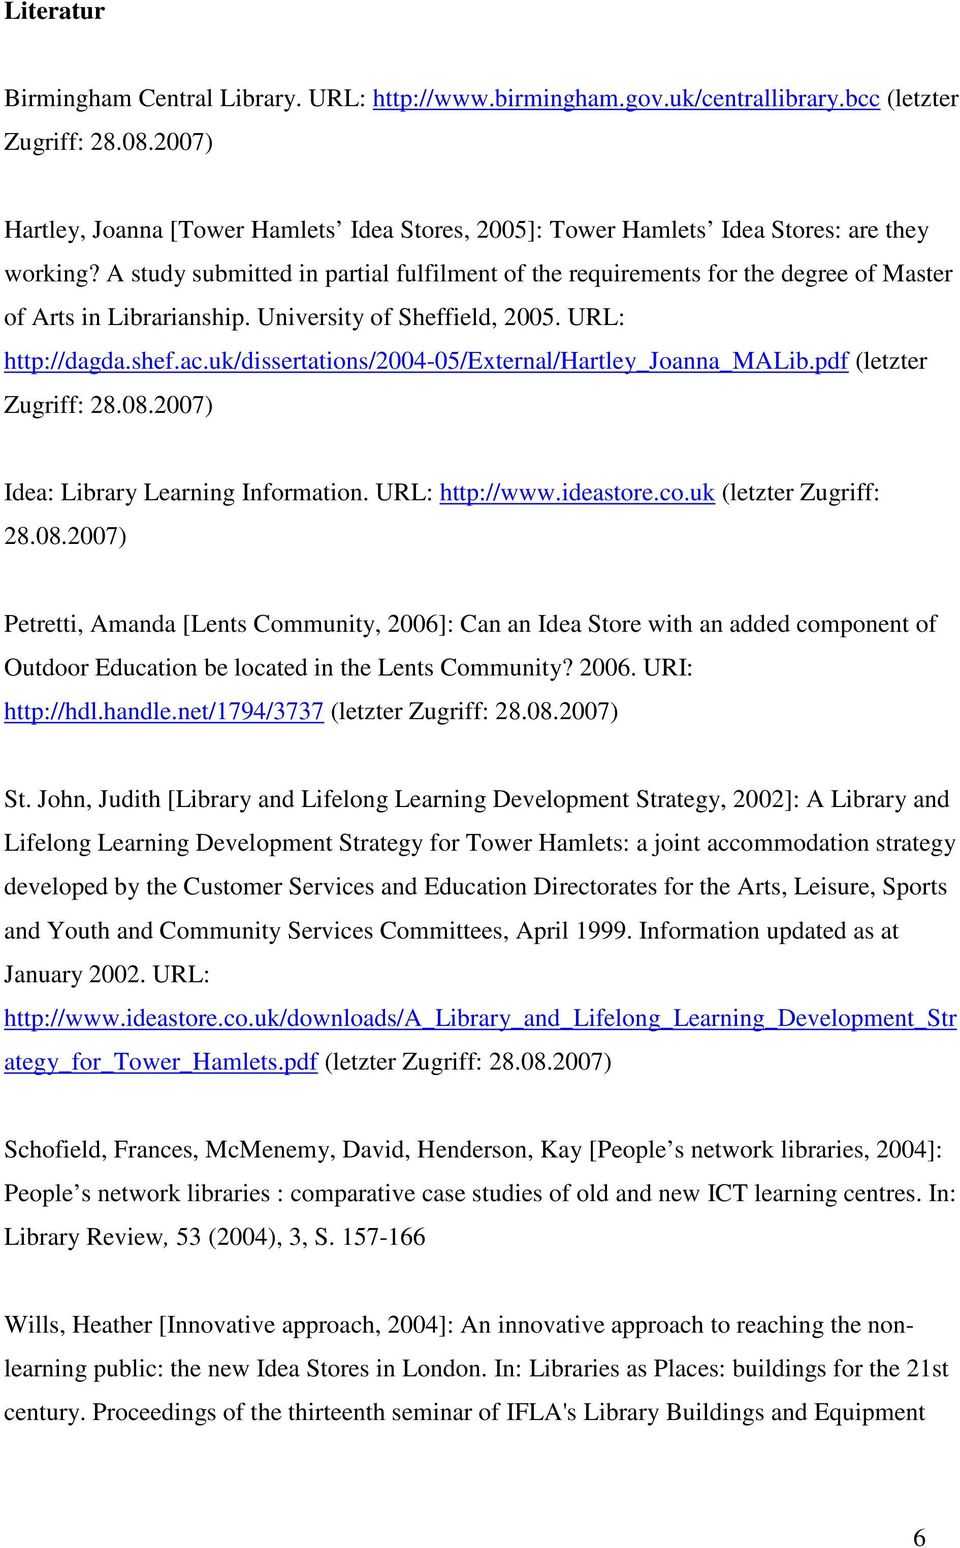 A study submitted in partial fulfilment of the requirements for the degree of Master of Arts in Librarianship. University of Sheffield, 2005. URL: http://dagda.shef.ac.